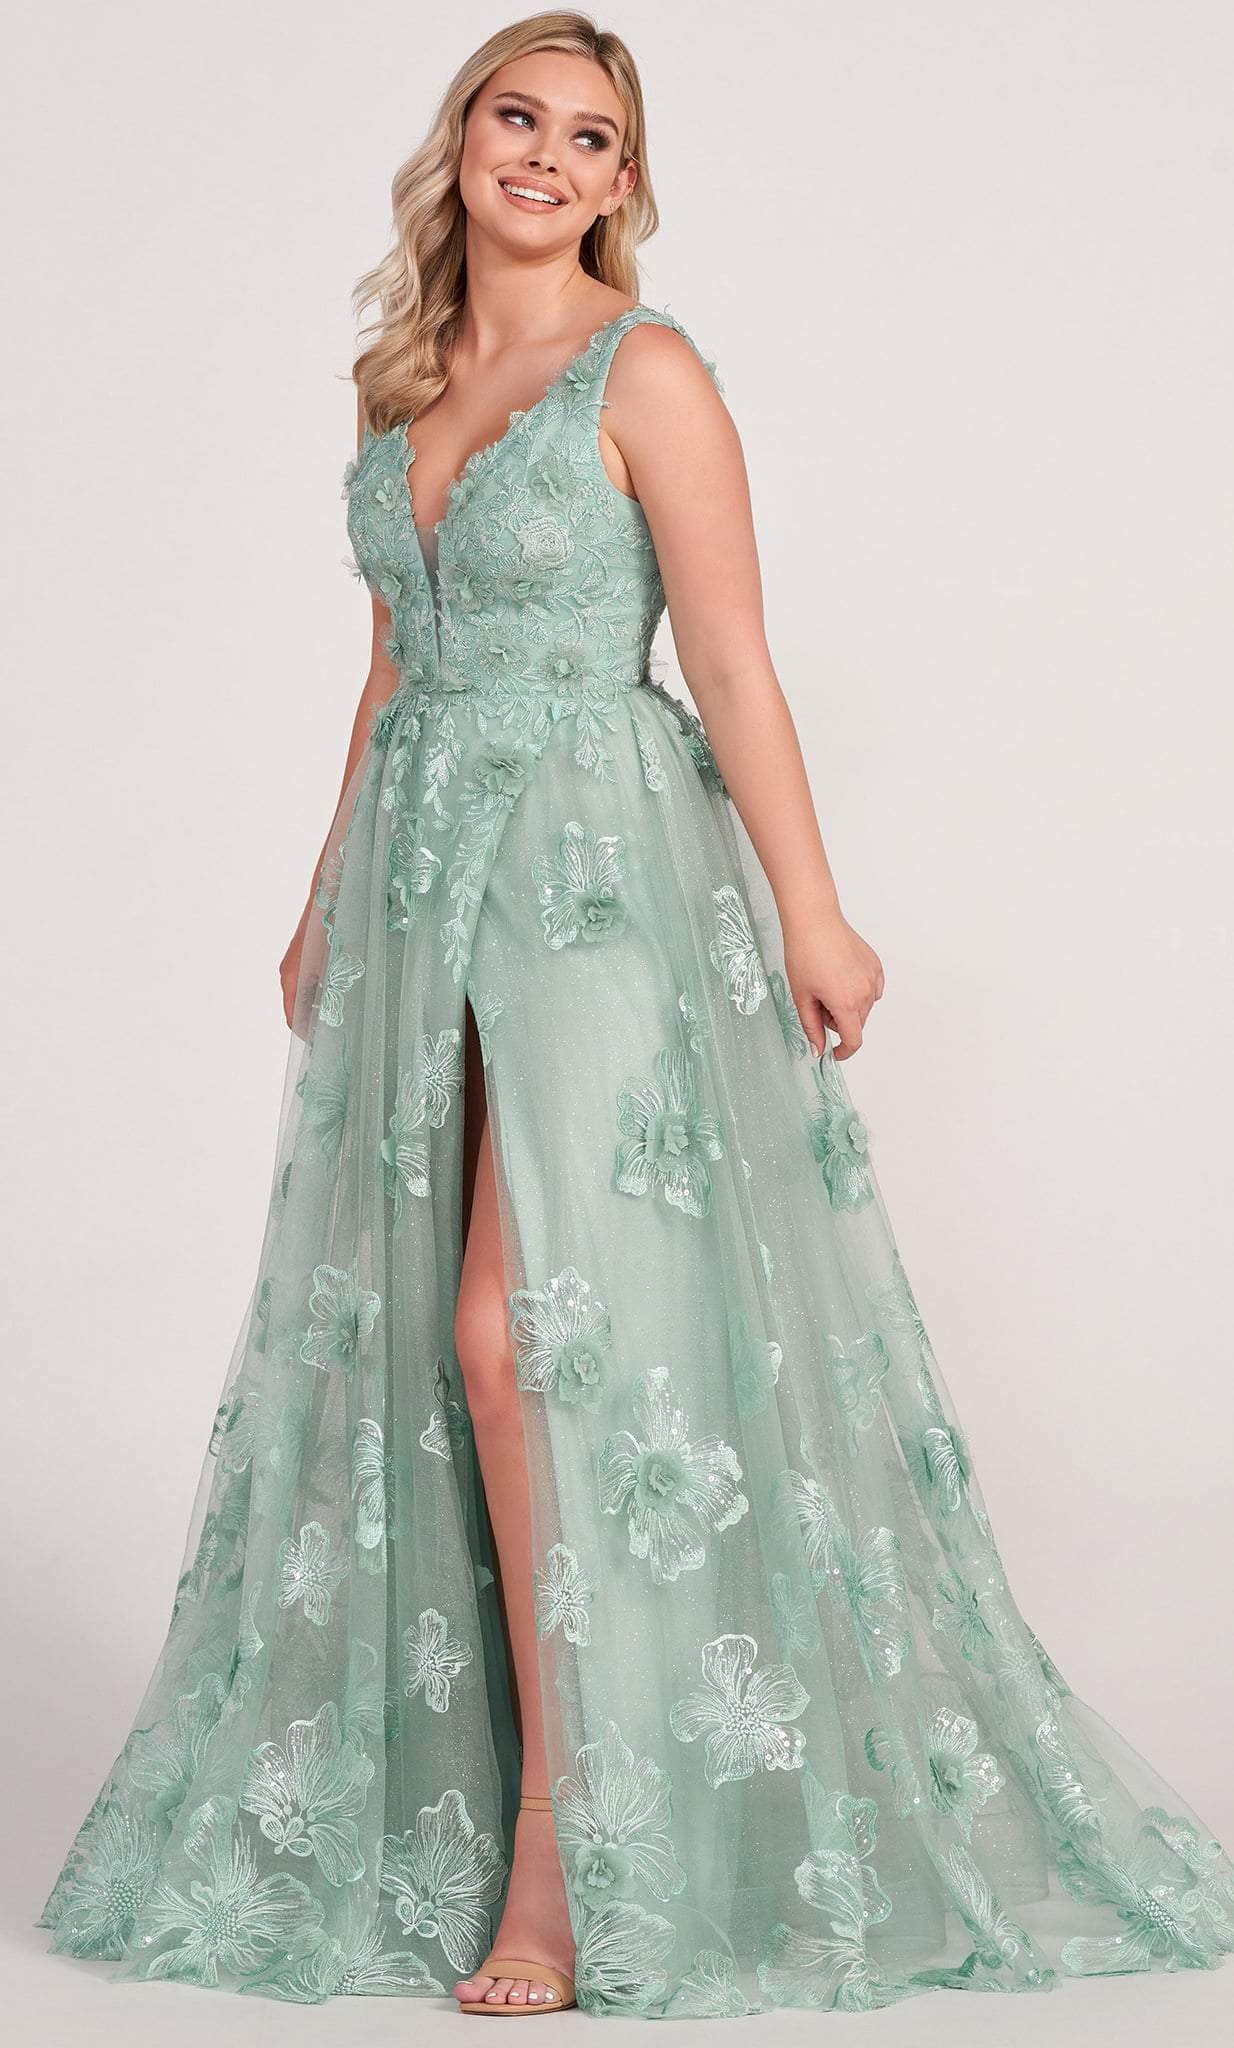 Image of Ellie Wilde EW34121 - Embroidered Lace Slit A line Prom Dress